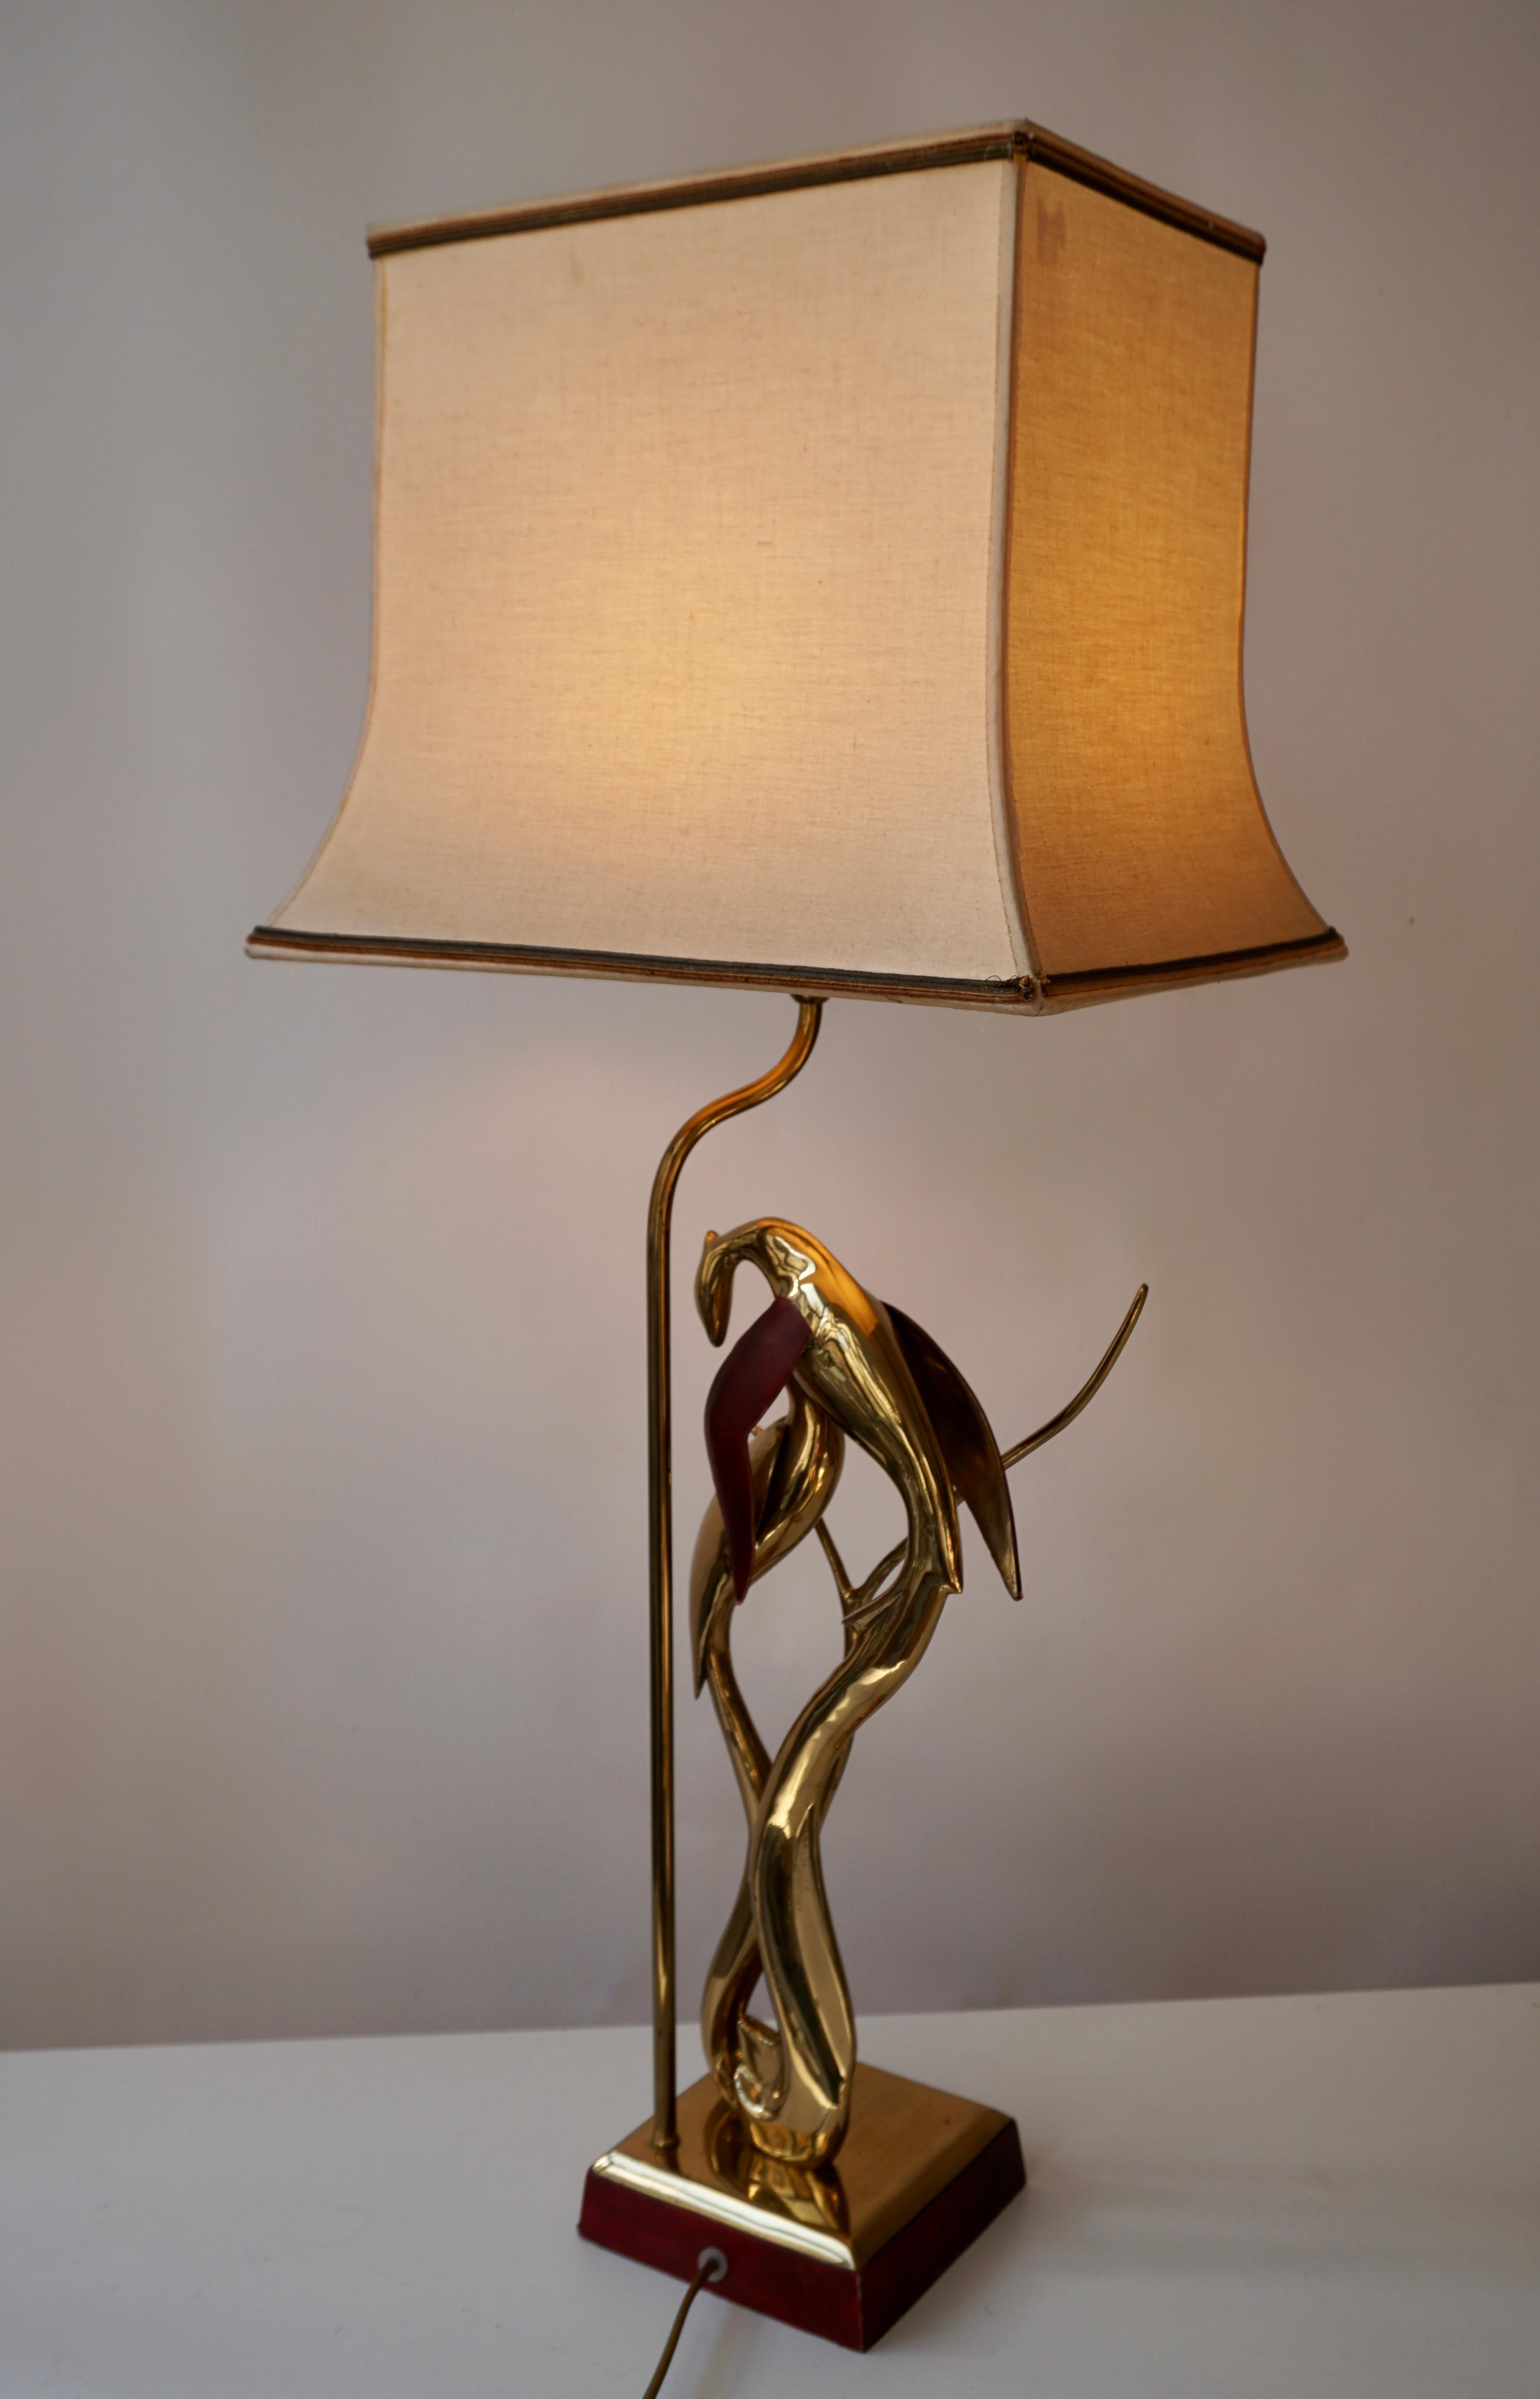 Sculptural Table Lamp with Birds in Brass and Leather, 1970s For Sale 3